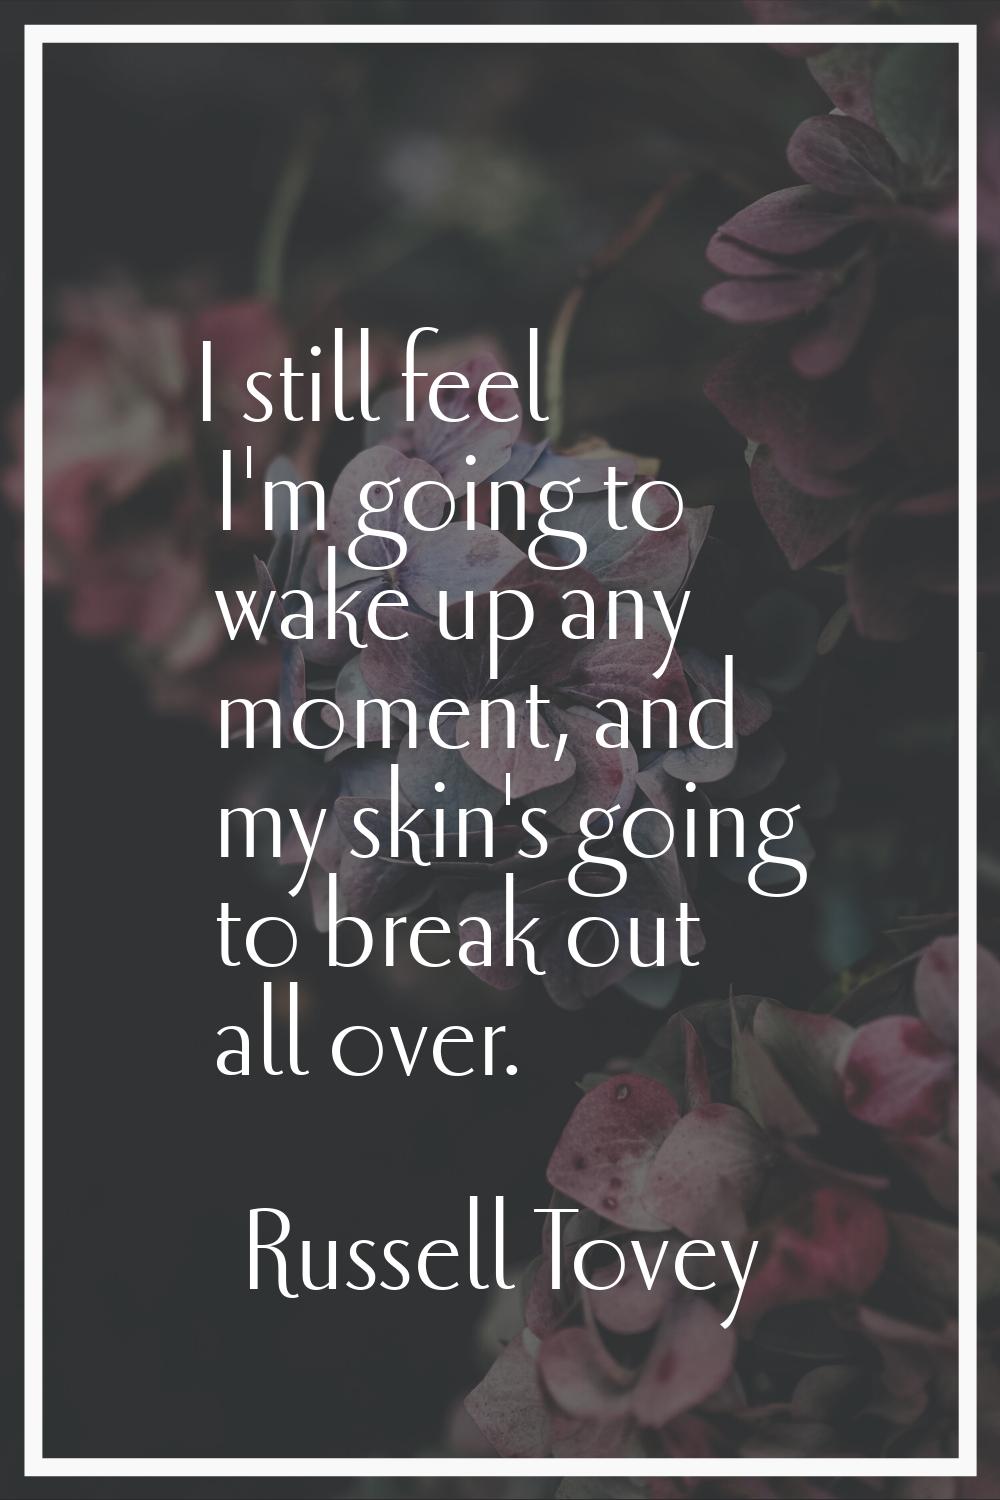 I still feel I'm going to wake up any moment, and my skin's going to break out all over.